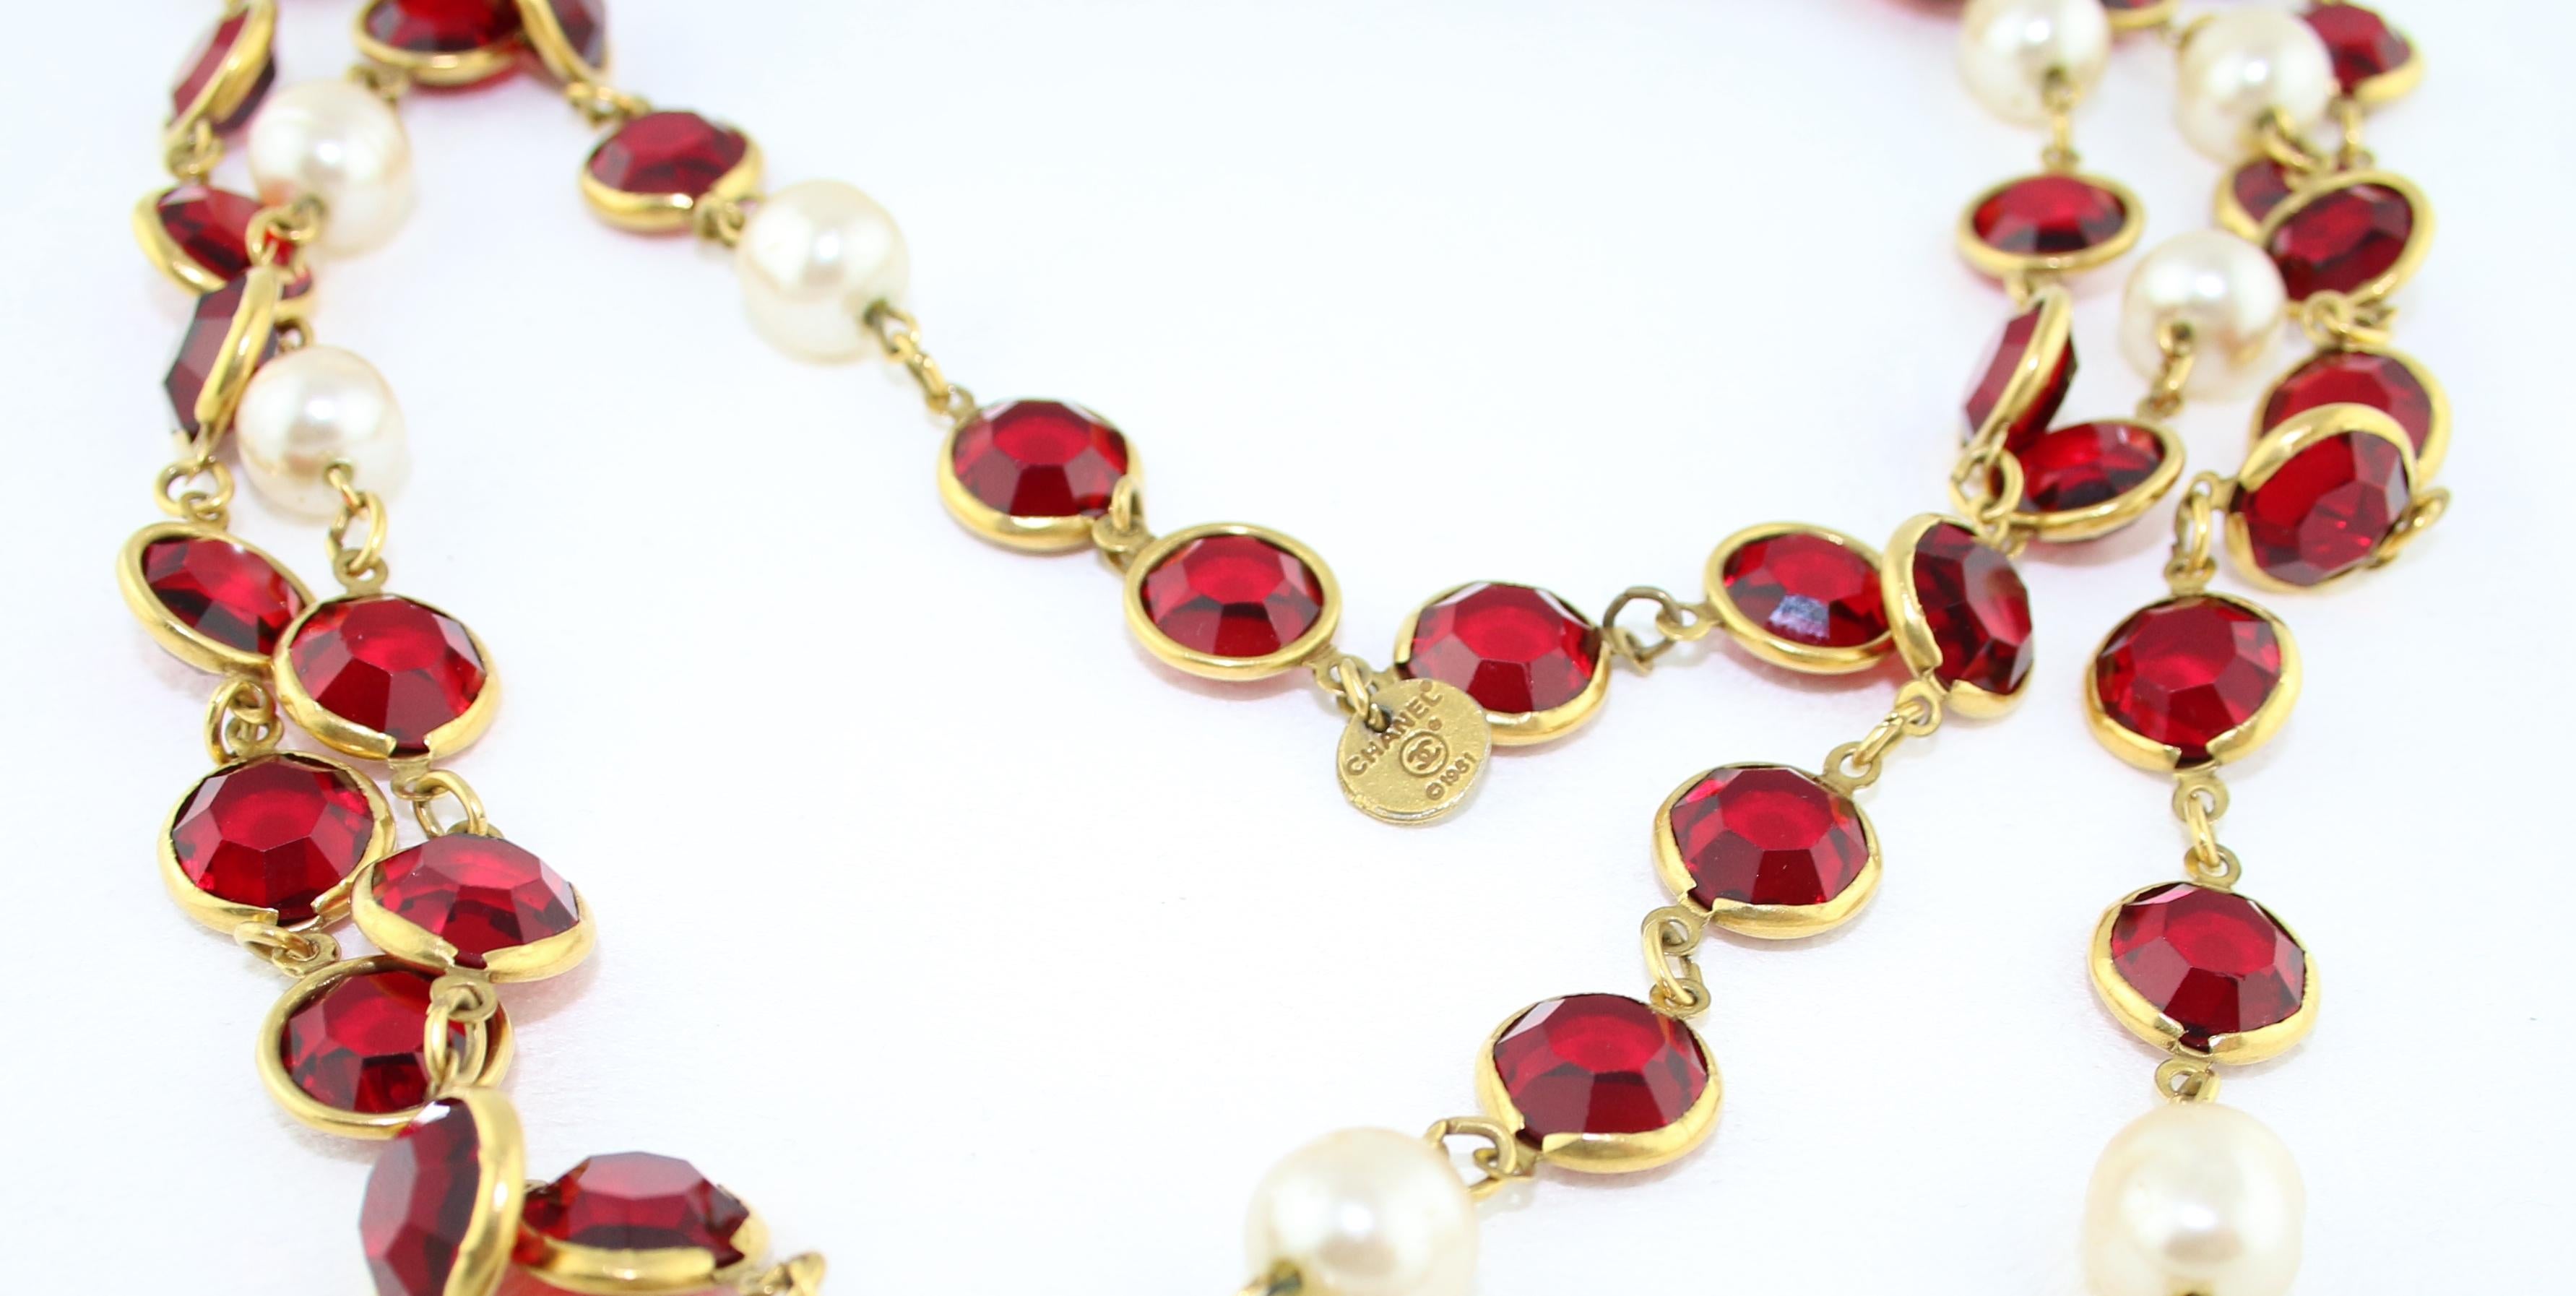 Vintage CHANEL 1981 Faux Pearl & Red Gripoix Long Necklace For Sale 2